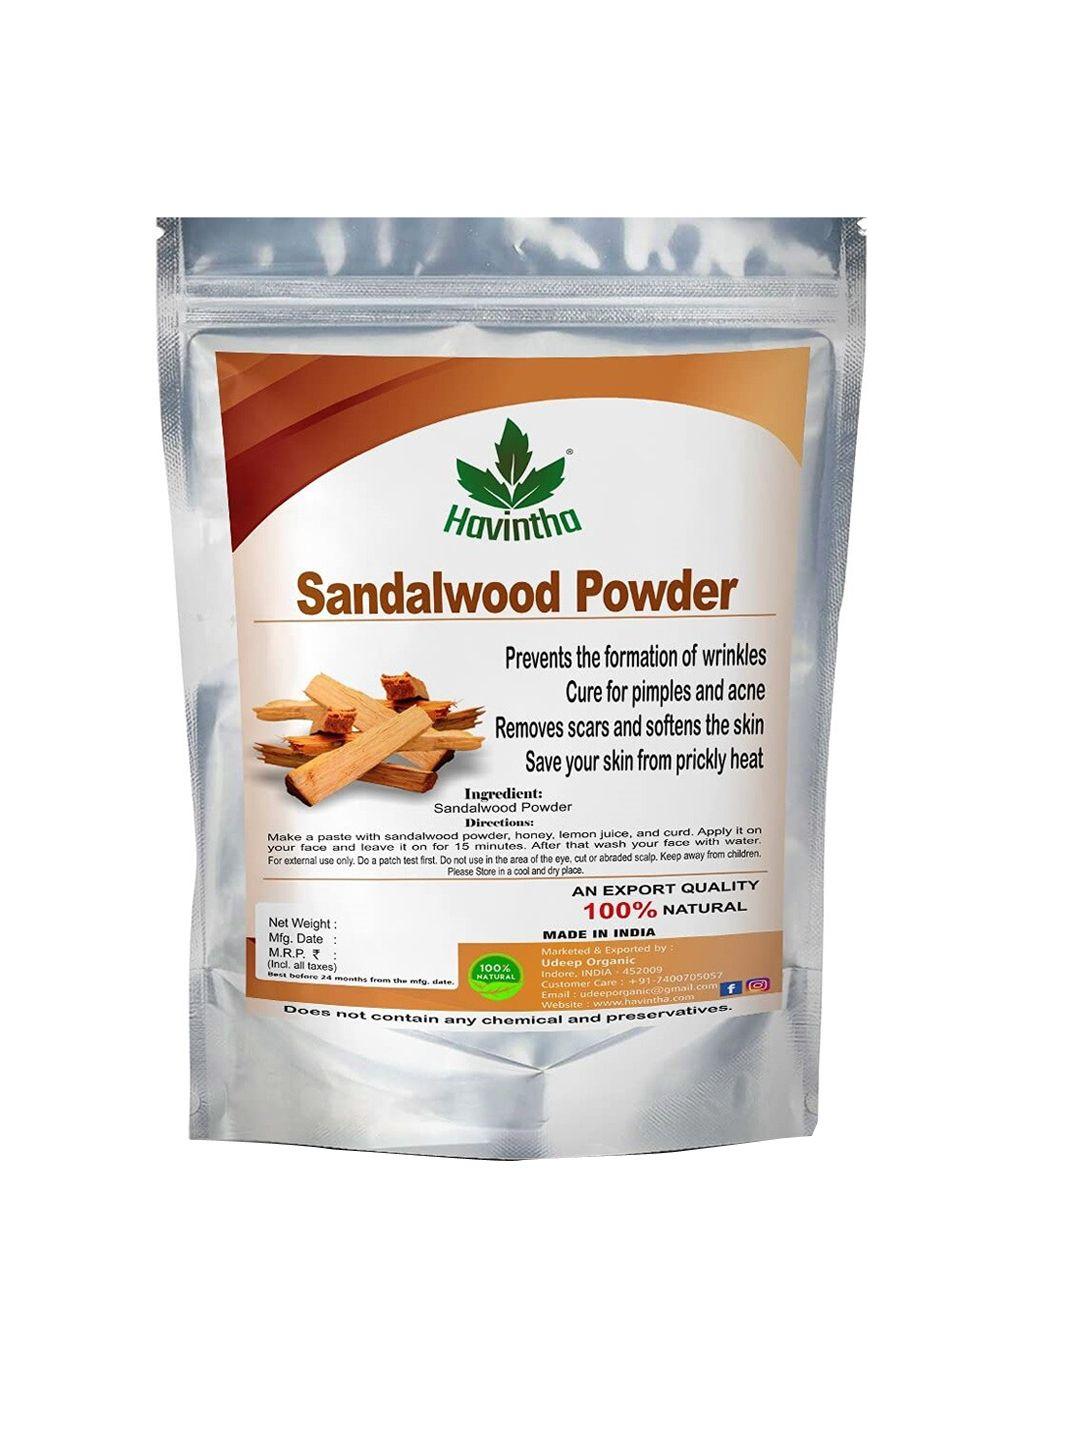 havintha pure and natural sandal wood powder for skin care - face pack 100 g